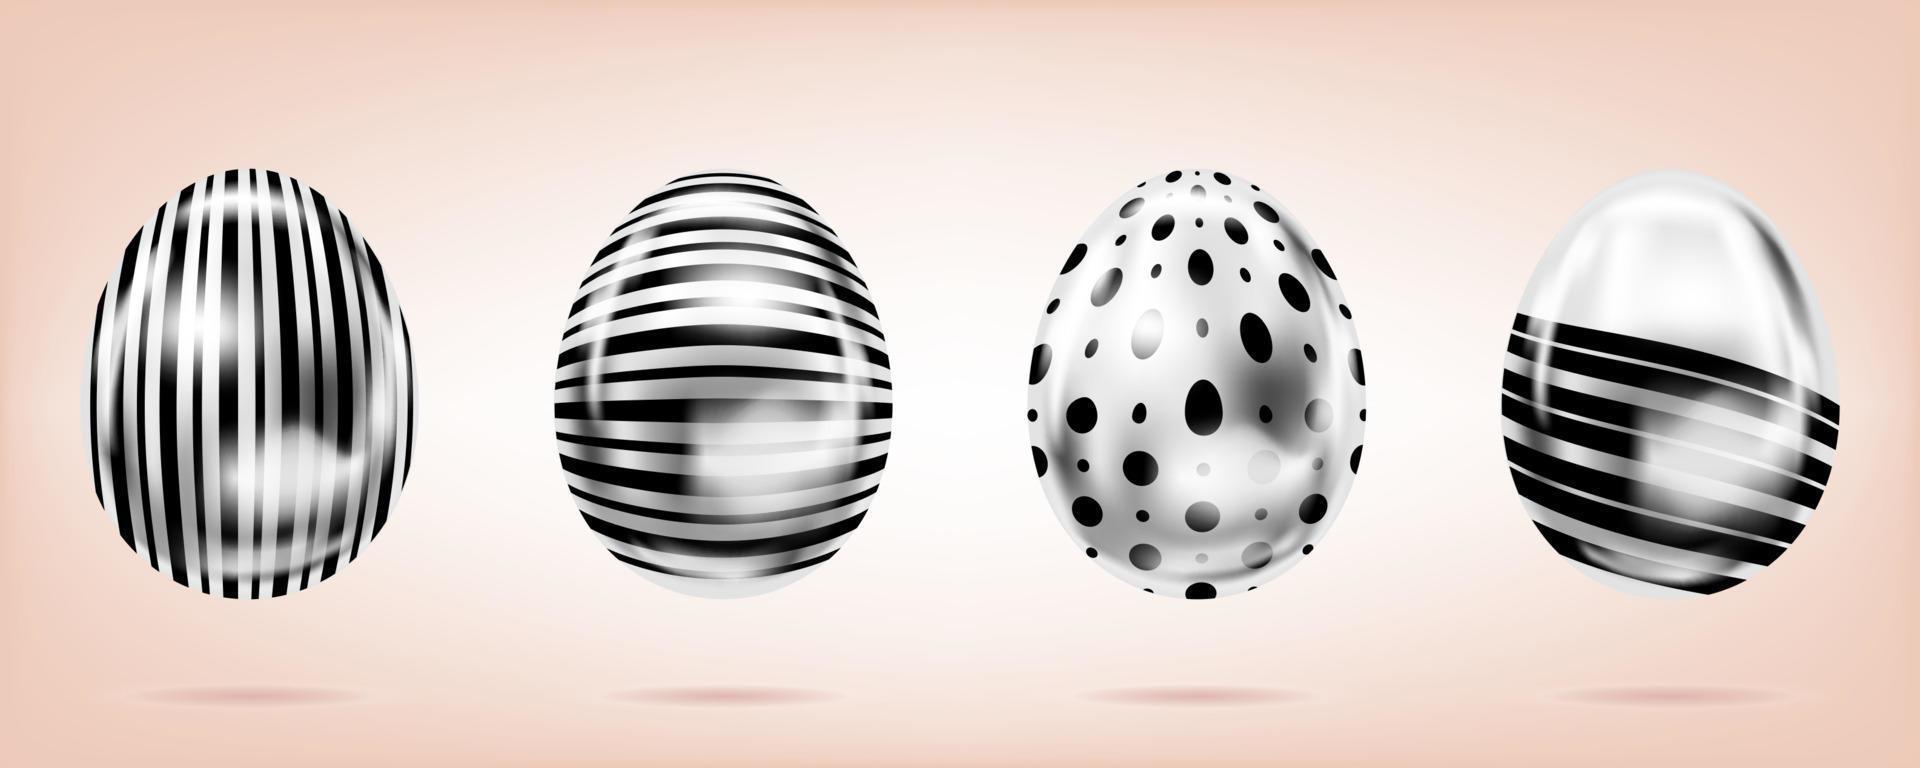 Four silver eggs on the pink background. Isolated objects for Easter decoration. Dots and stripes ornate vector